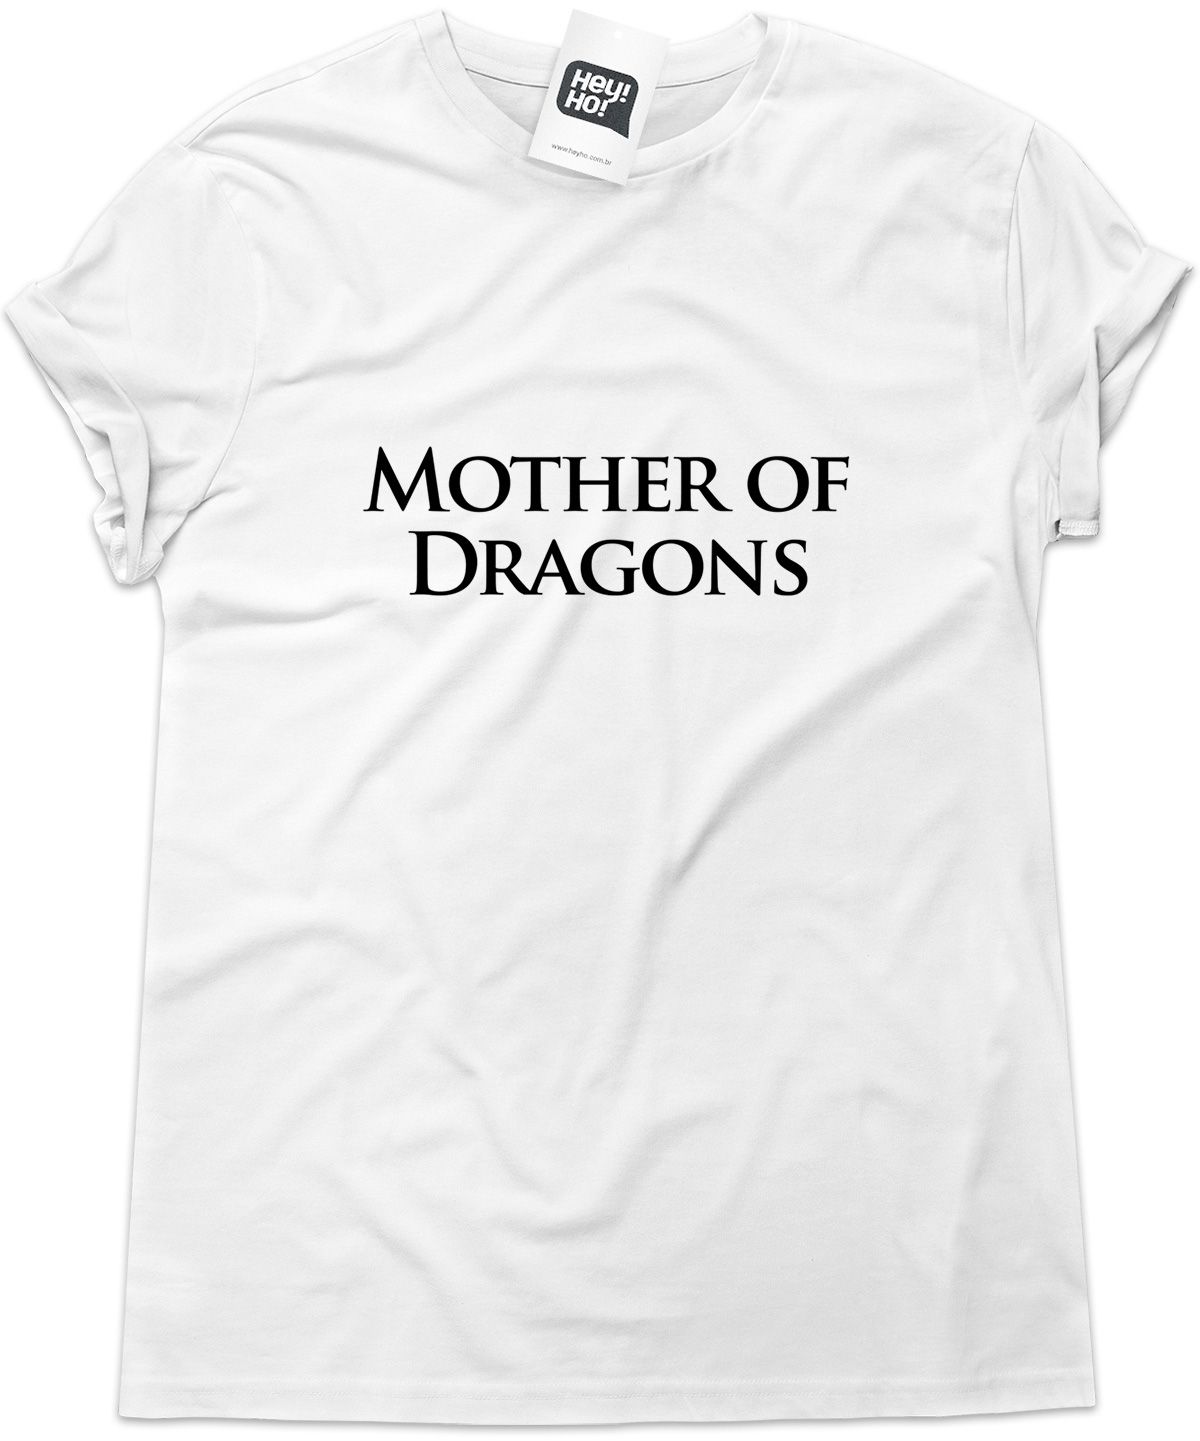 GAME OF THRONES - Mother of Dragons